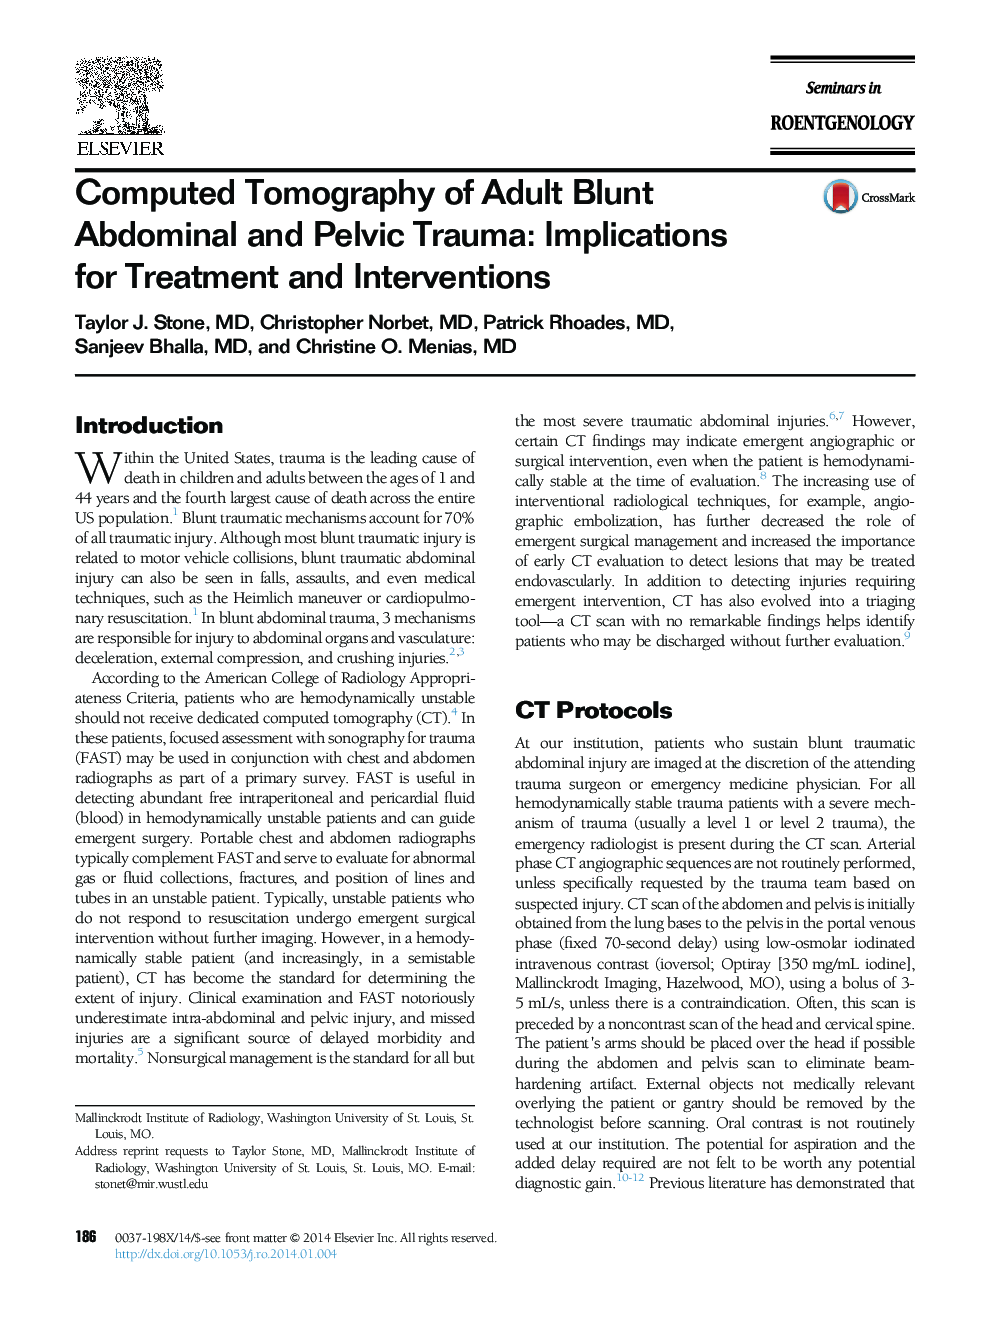 Computed Tomography of Adult Blunt Abdominal and Pelvic Trauma: Implications for Treatment and Interventions